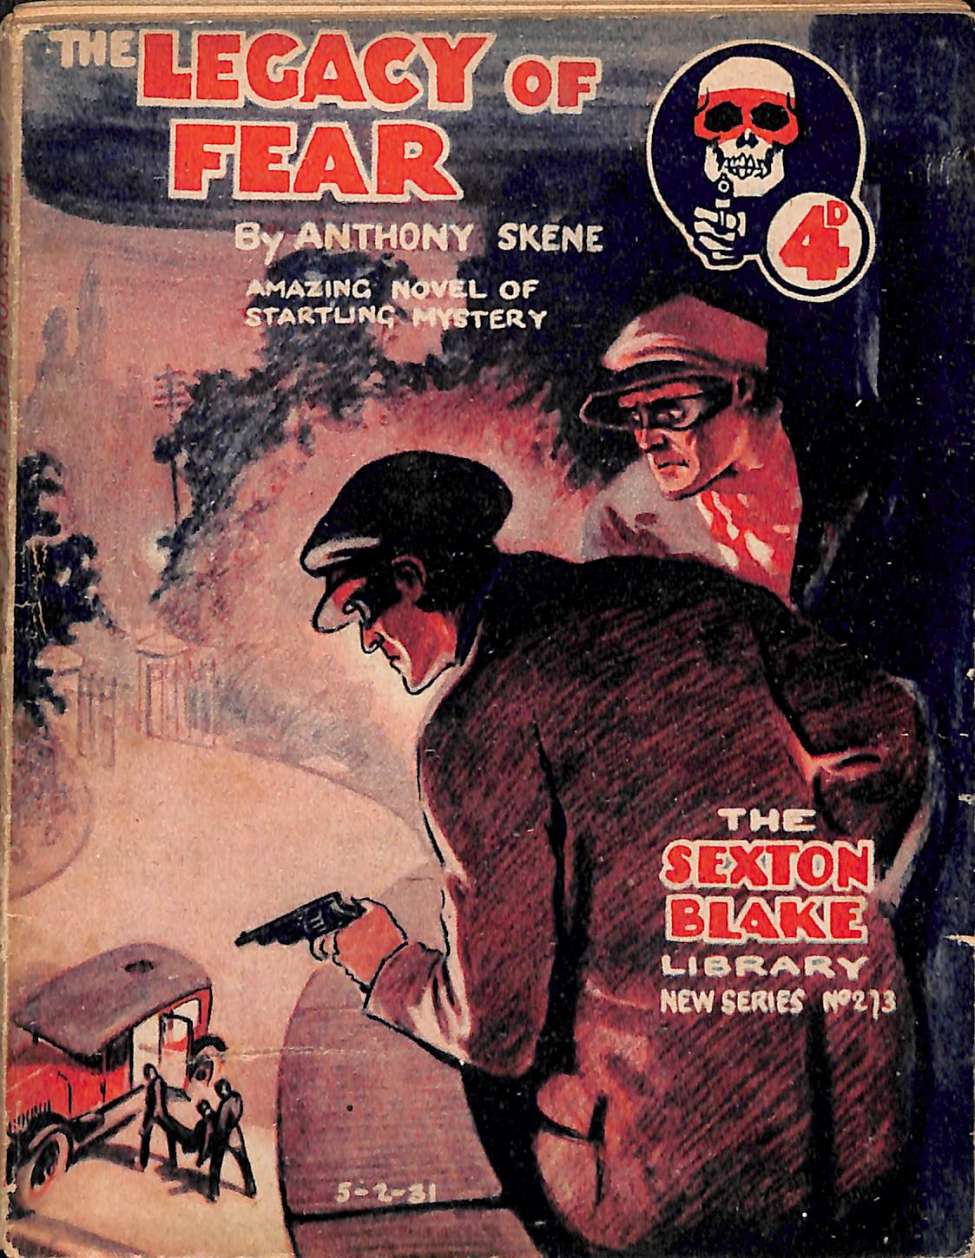 Book Cover For Sexton Blake Library S2 273 - The Legacy of Fear